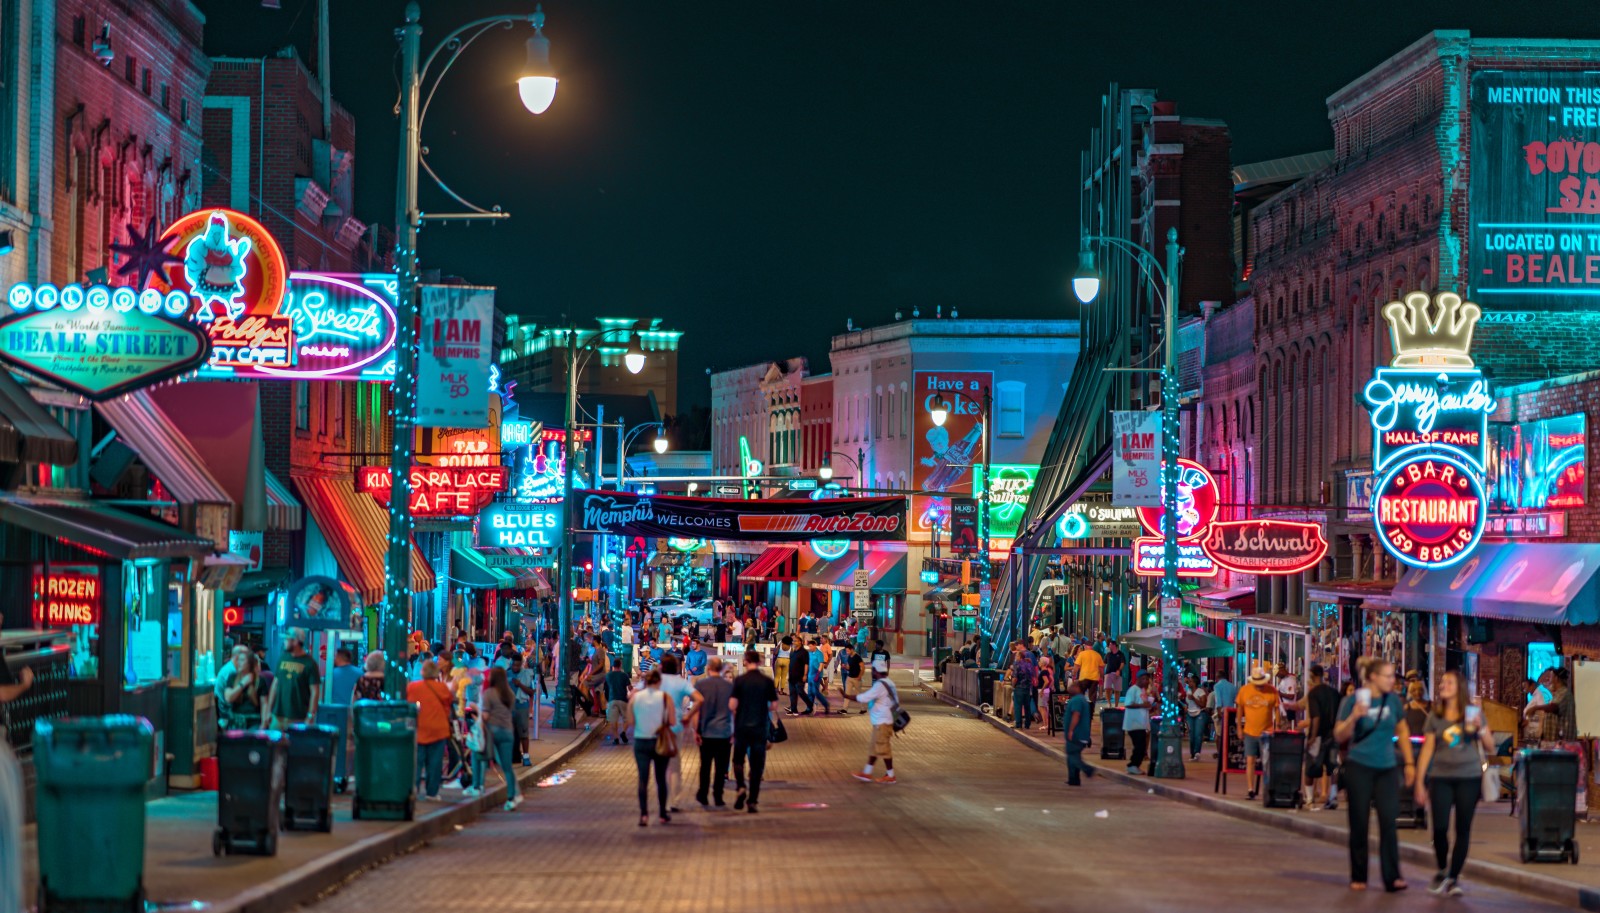 Street way in Memphis, Tennessee lined with colorful neon signs